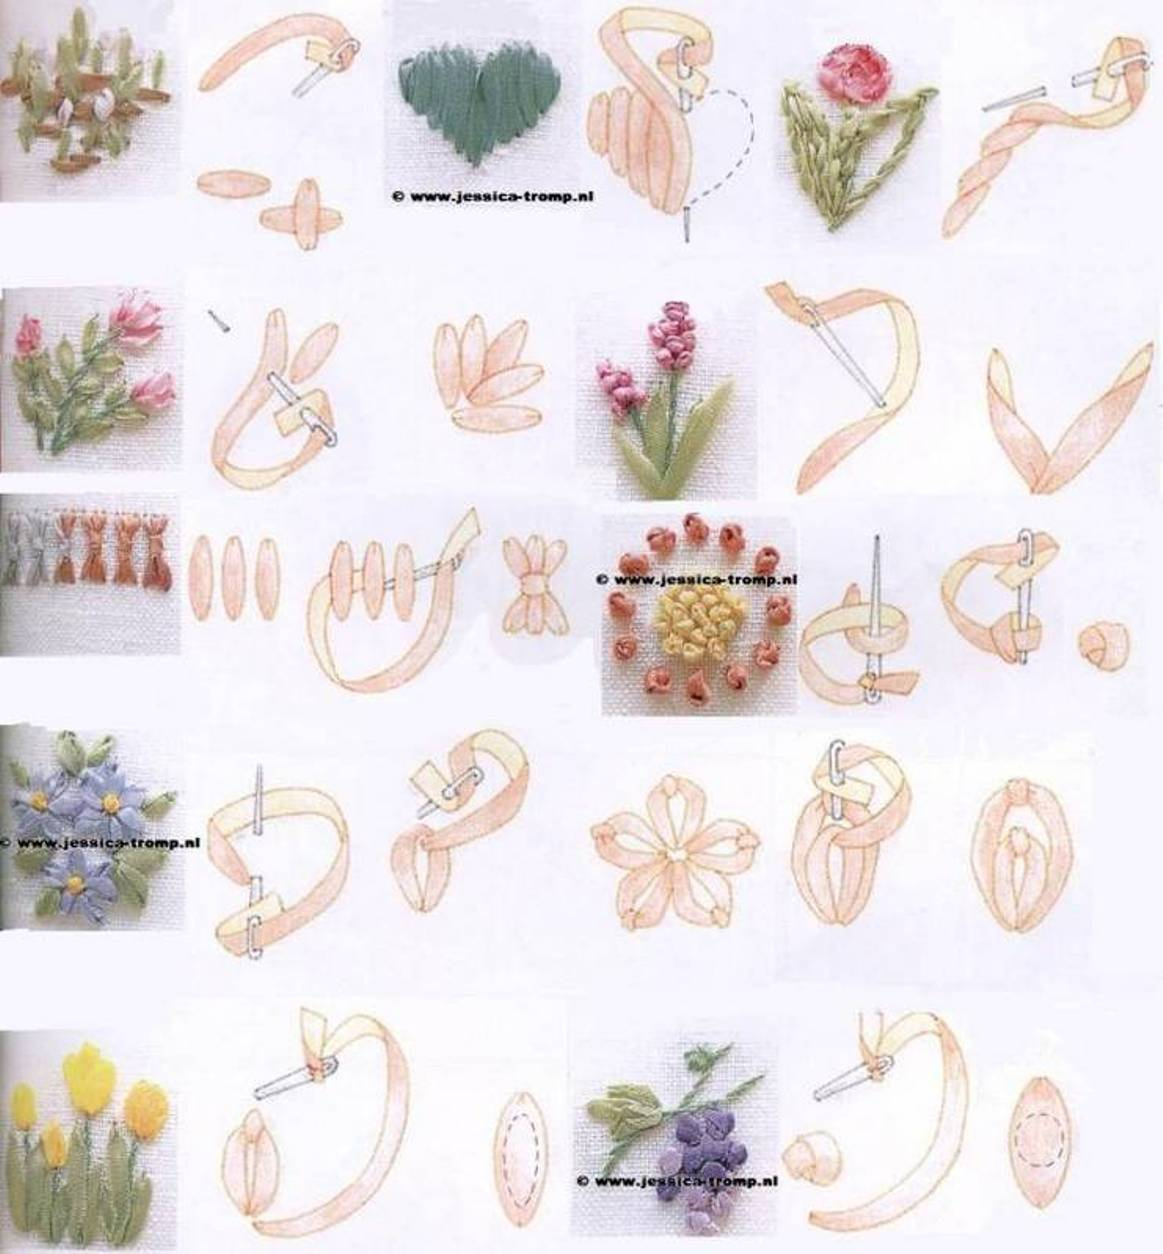 Silk Ribbon Embroidery Patterns Emys Gallery Silk Ribbon Embroidery Techniques